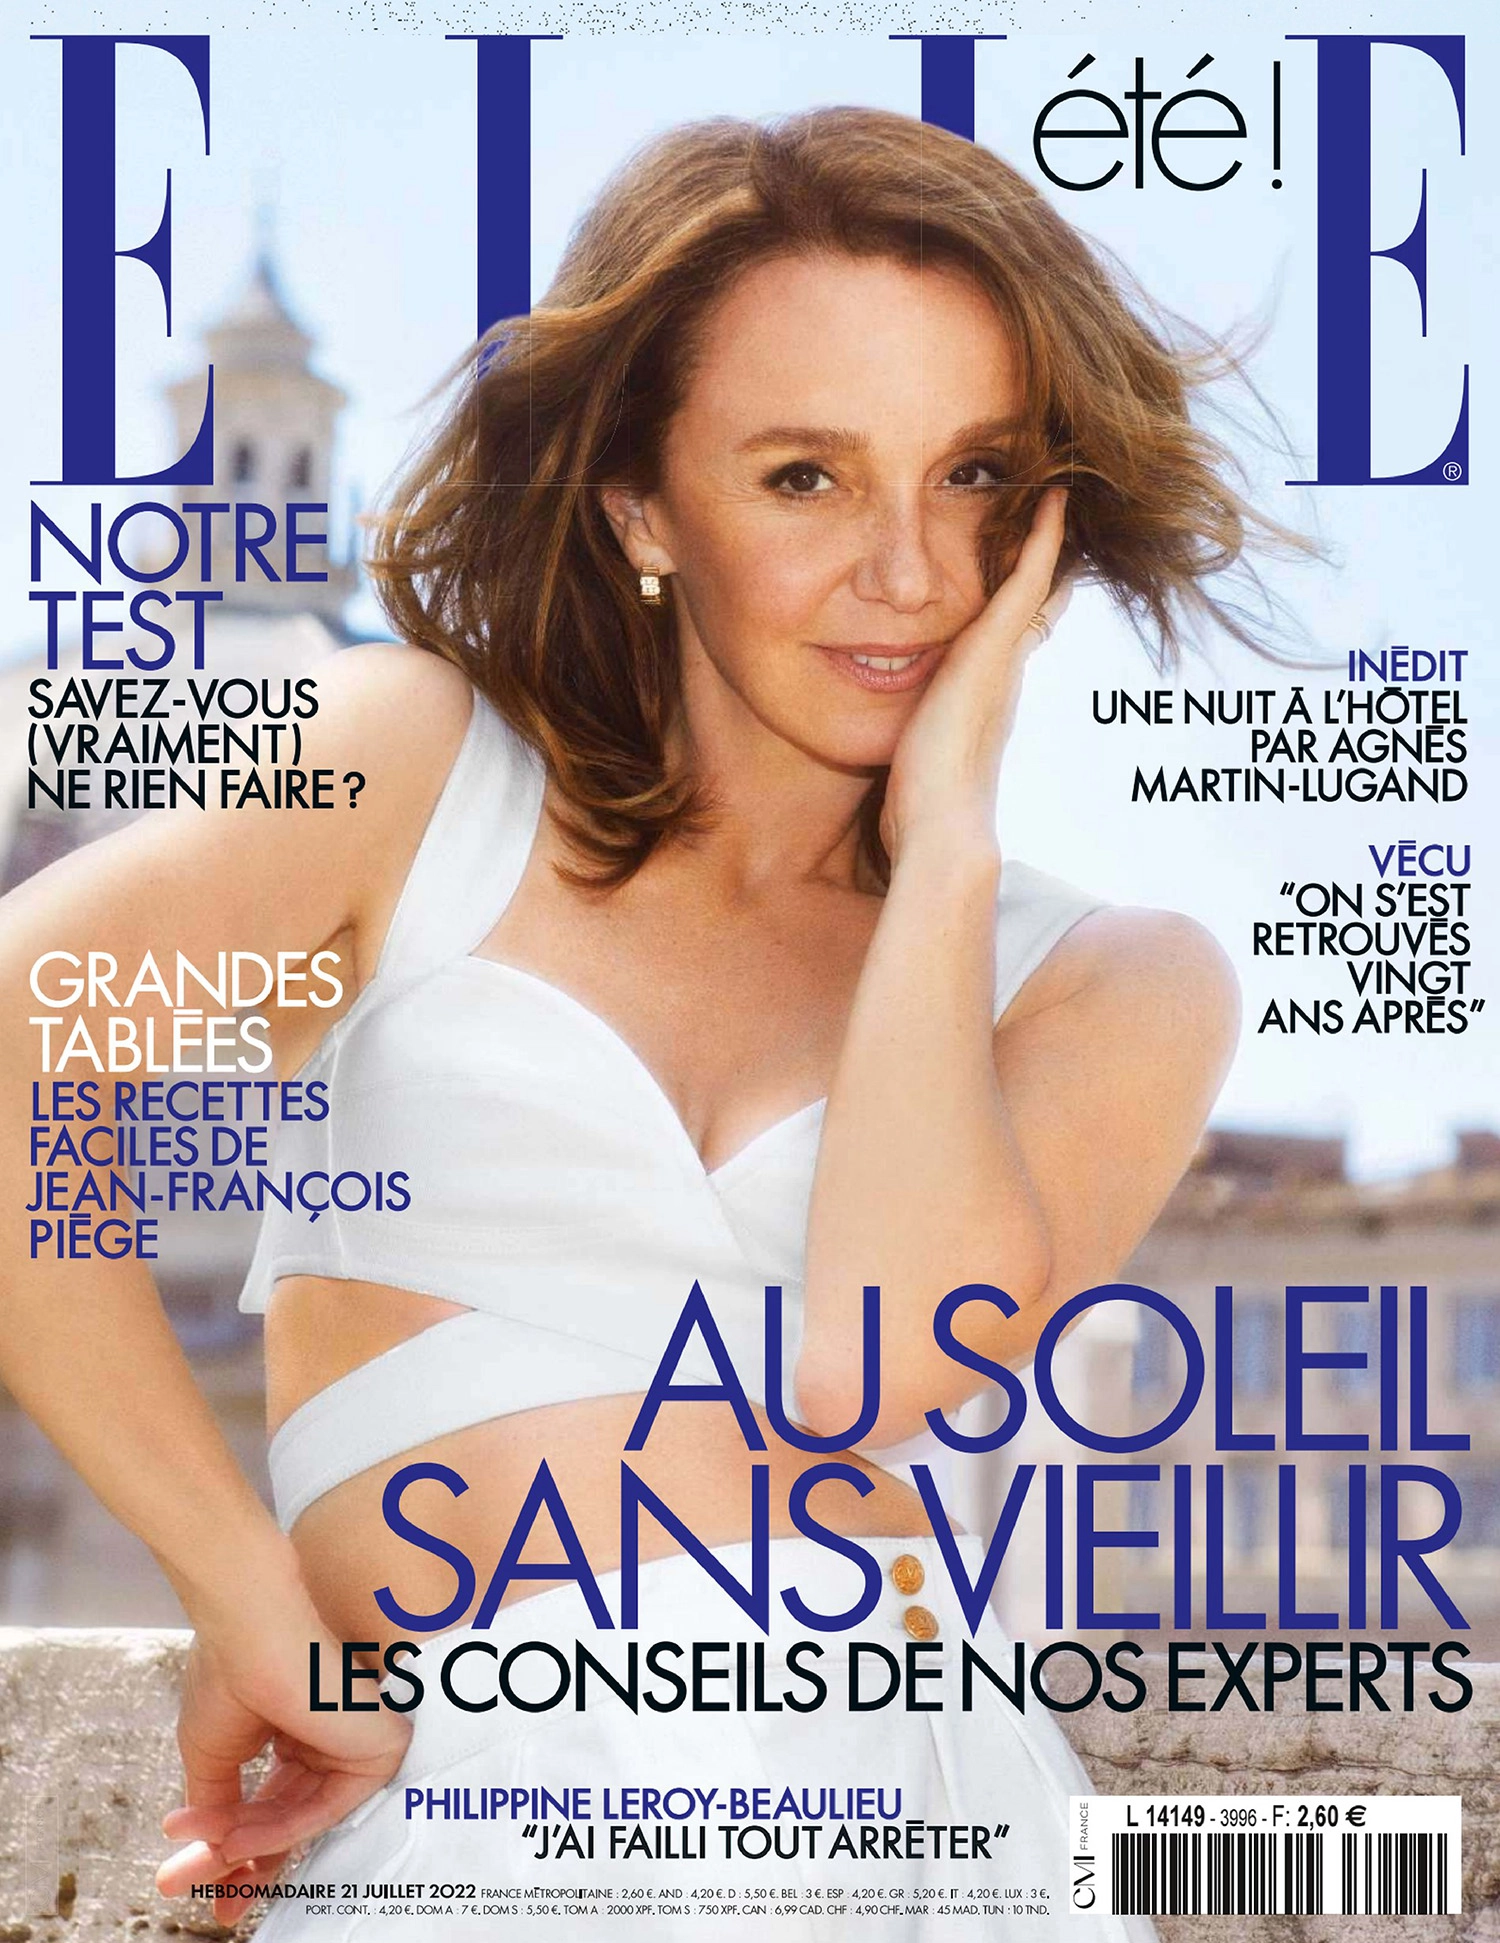 Philippine Leroy-Beaulieu covers Elle France July 21st, 2022 by Laura Sciacovelli